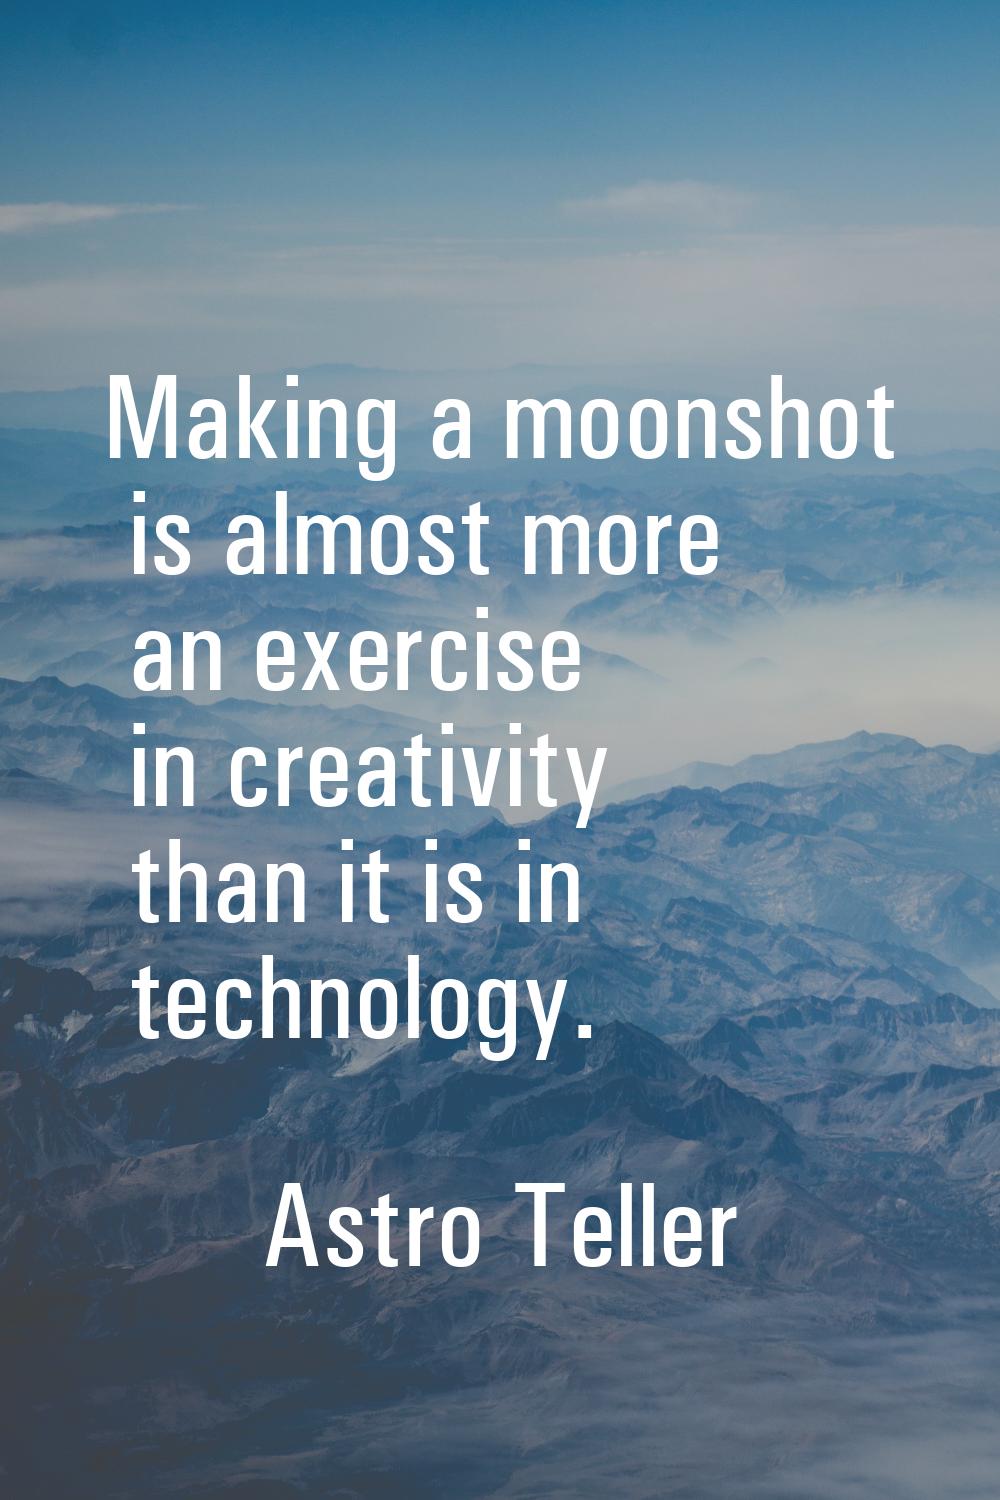 Making a moonshot is almost more an exercise in creativity than it is in technology.